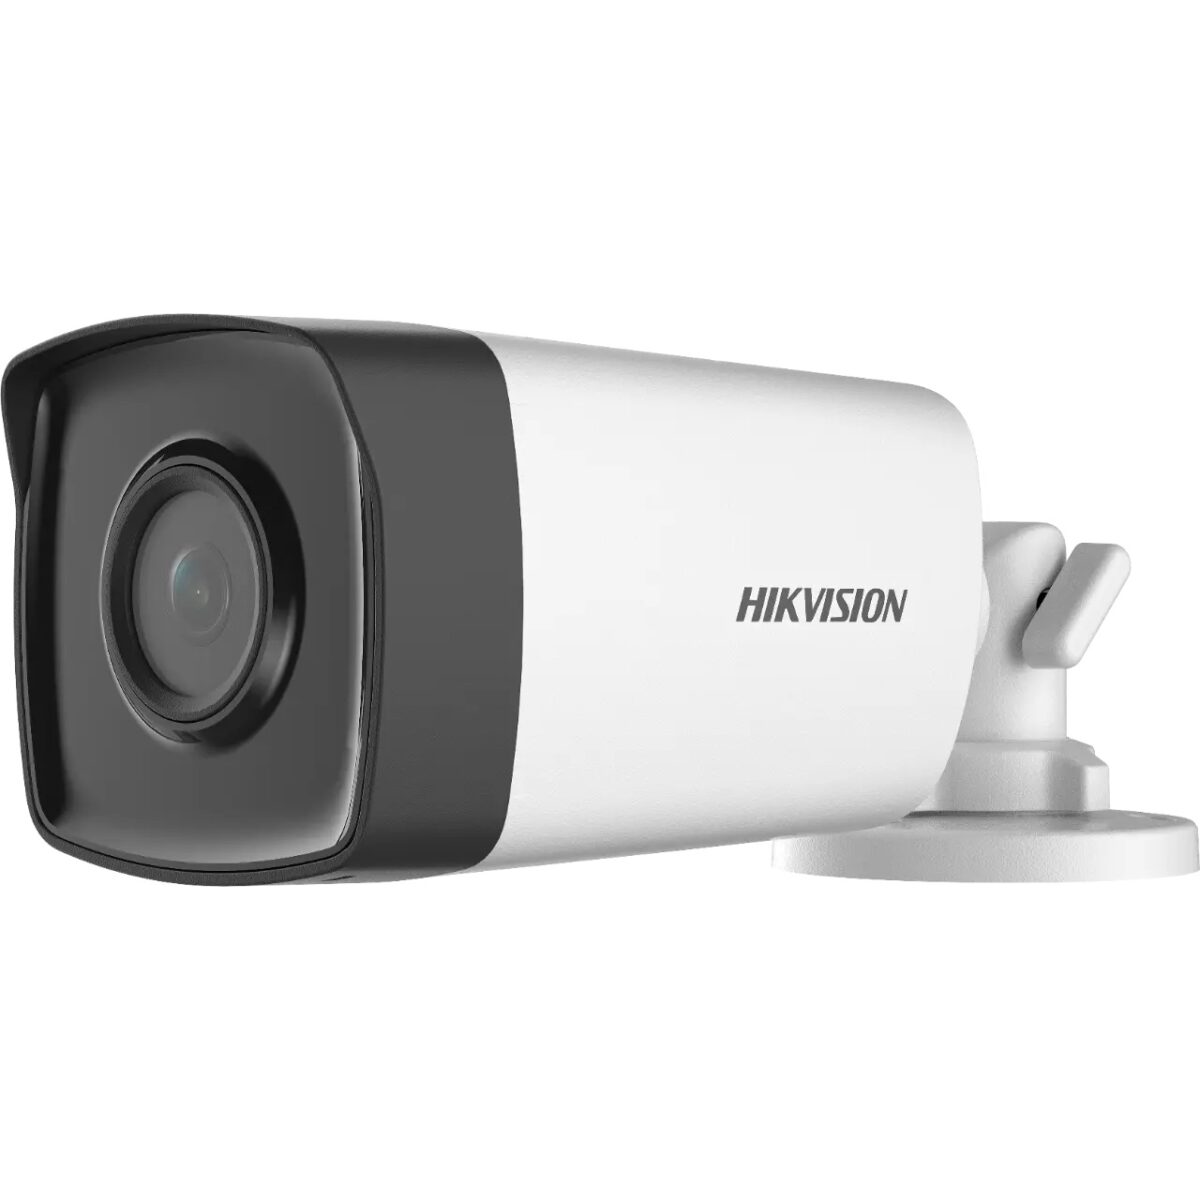 Hikvision 2 MP Fixed Bullet Camera – DS‐2CE17DOT‐IT1F